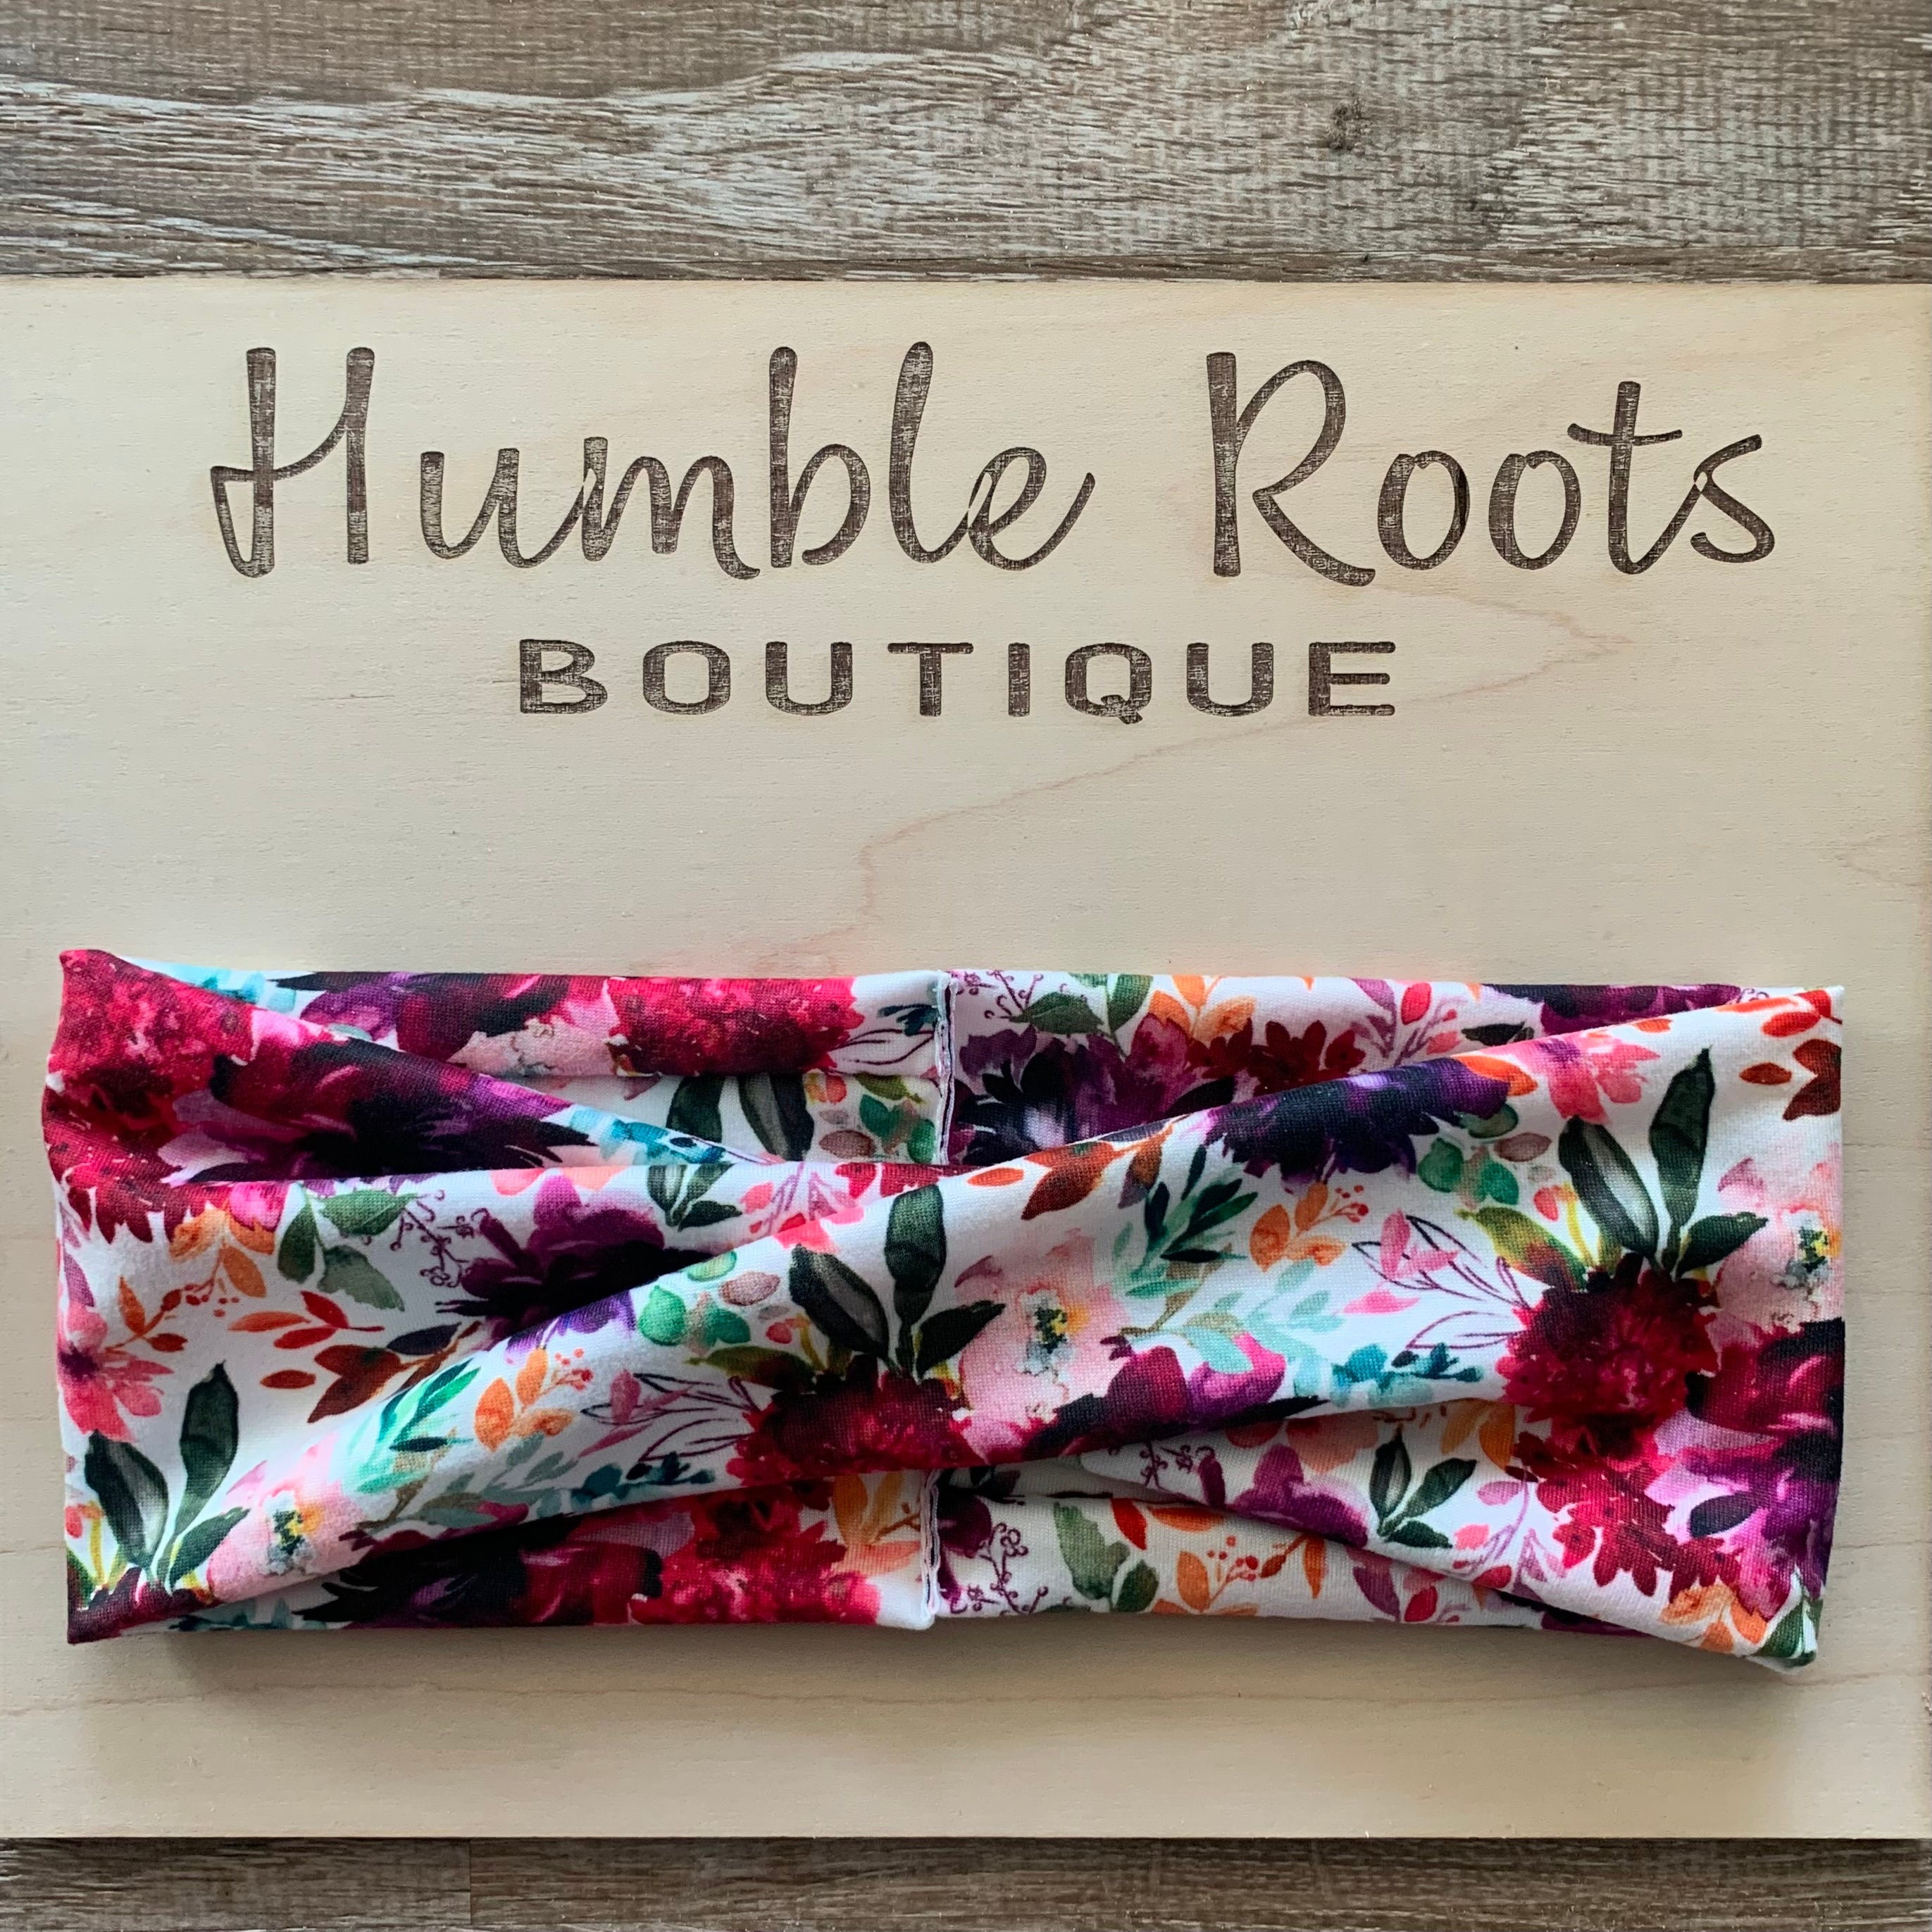 Adventure Fund Bank – Humble Roots Boutique